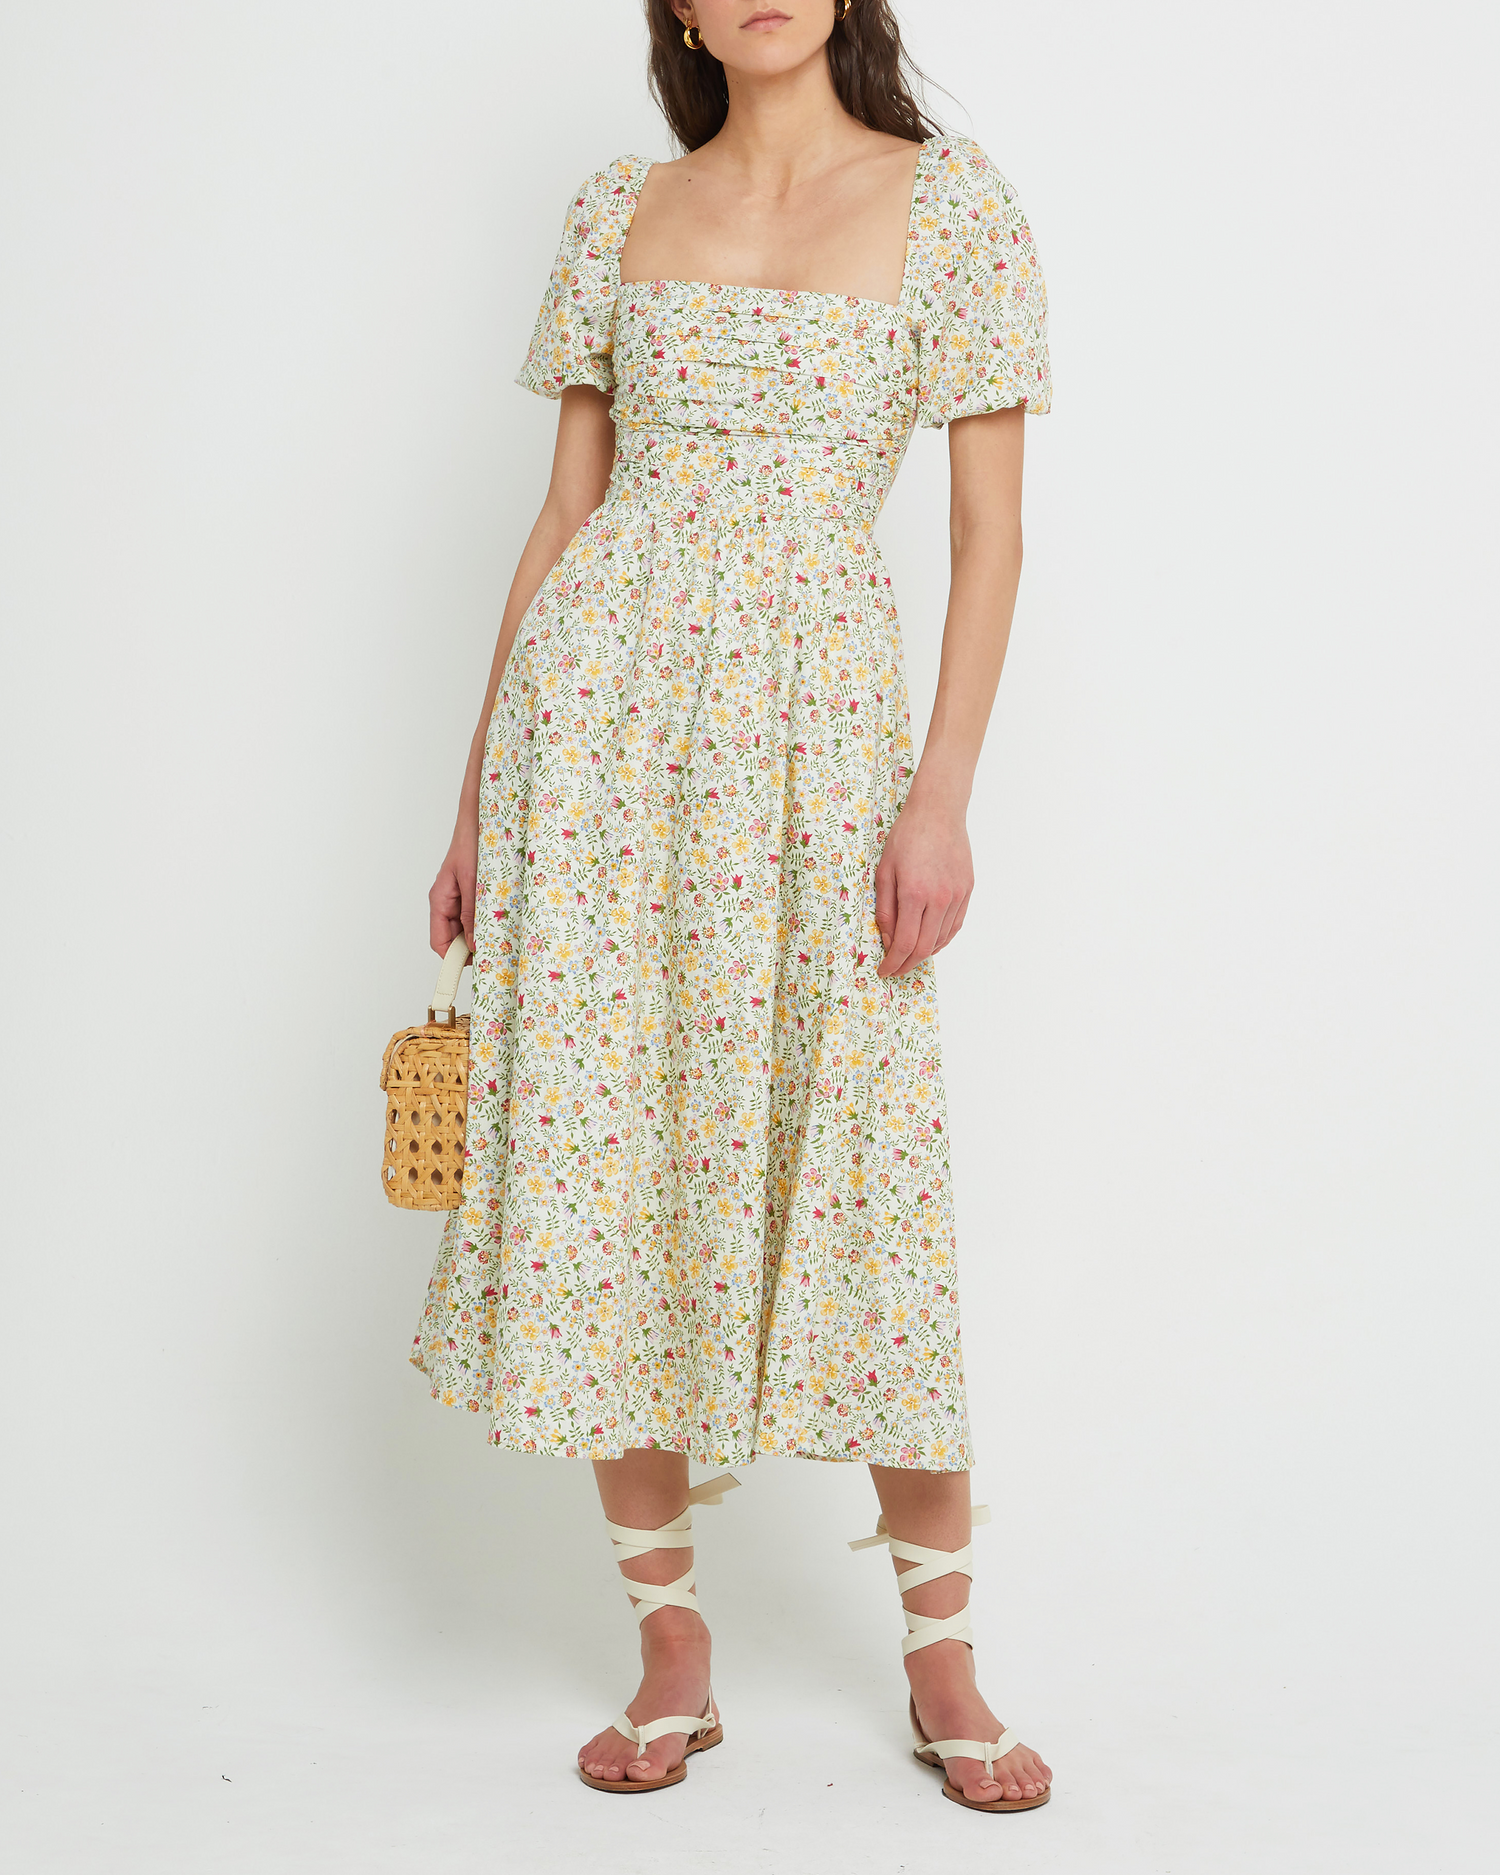 First image of River Dress, a floral midi dress, square neckline, short puff sleeves, gathered bodice